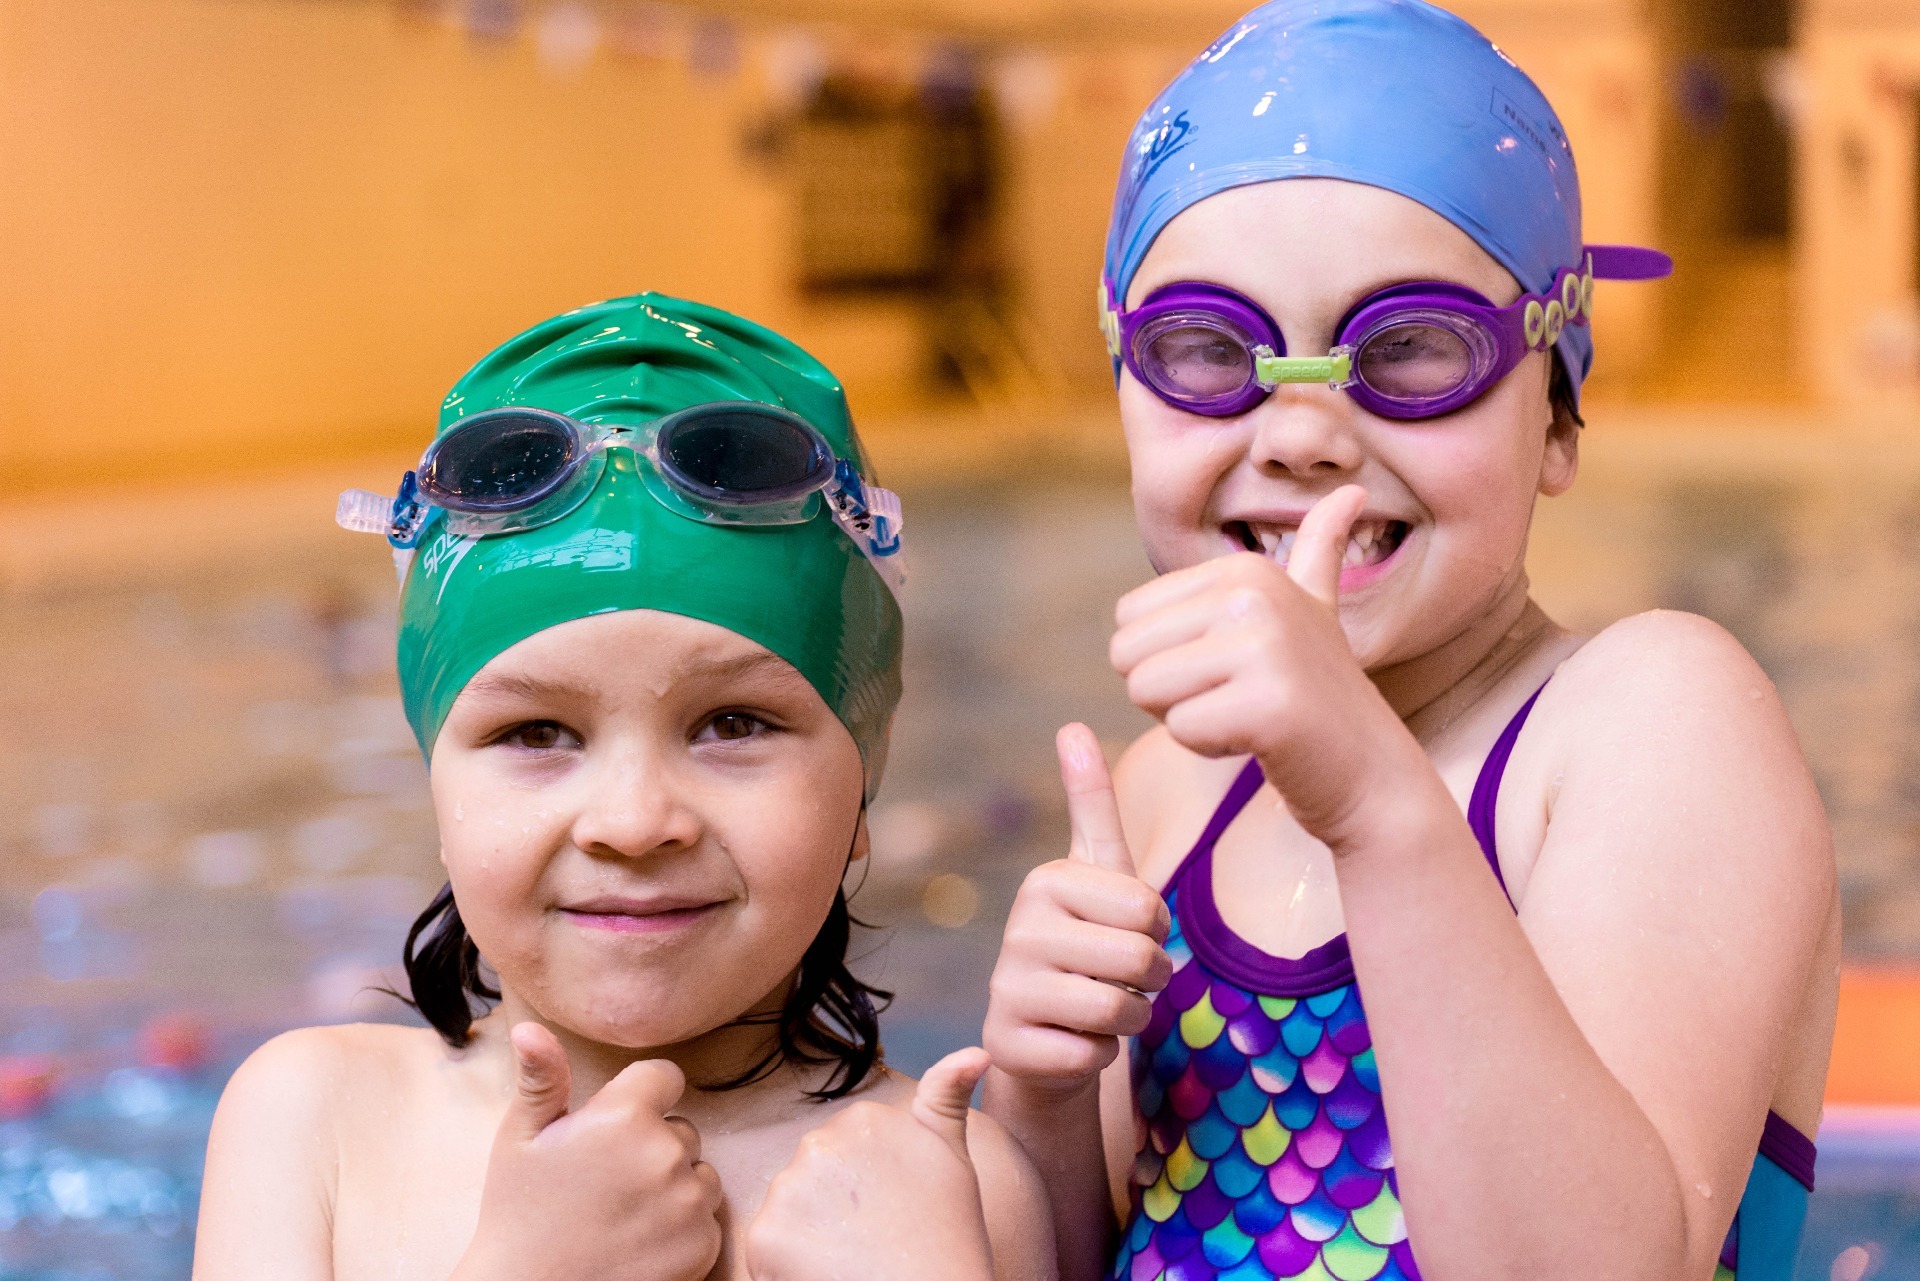 Children in swimming costumes giving thumbs up